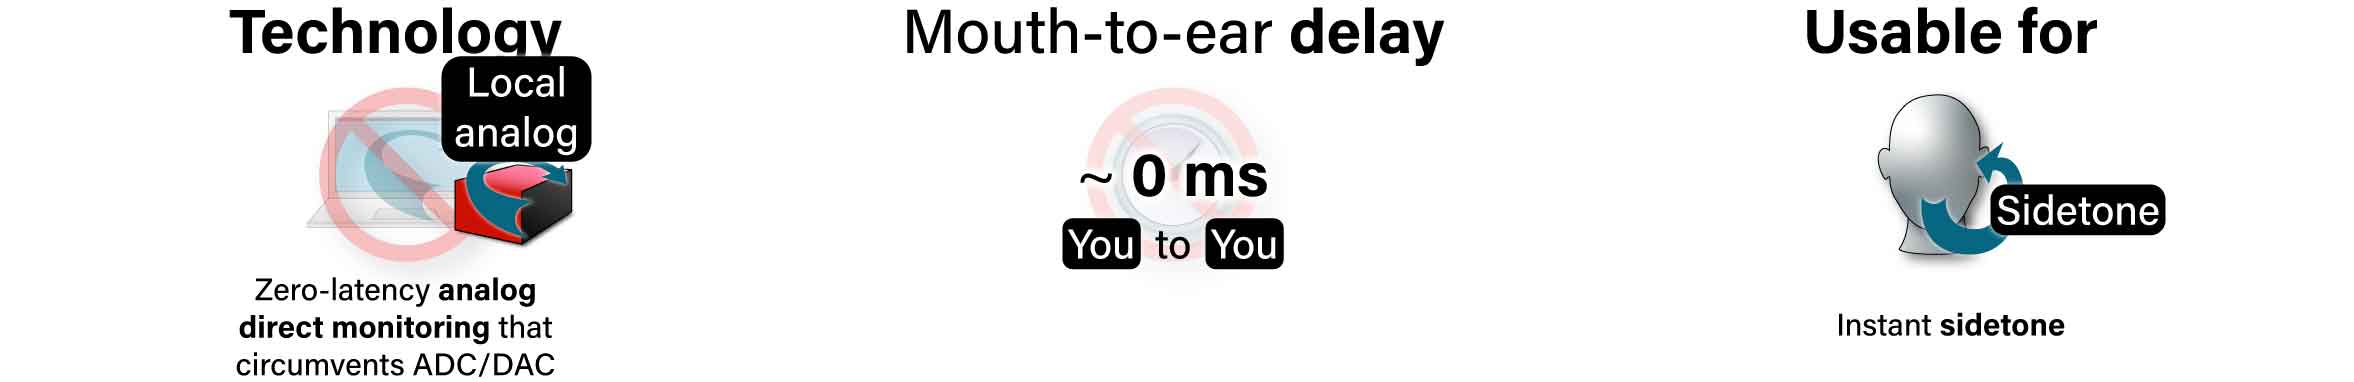 Illustration of local analog monitoring achieving so-called zero-latency delay from your mouth to your ear, which is suitable for listening to your sidetone